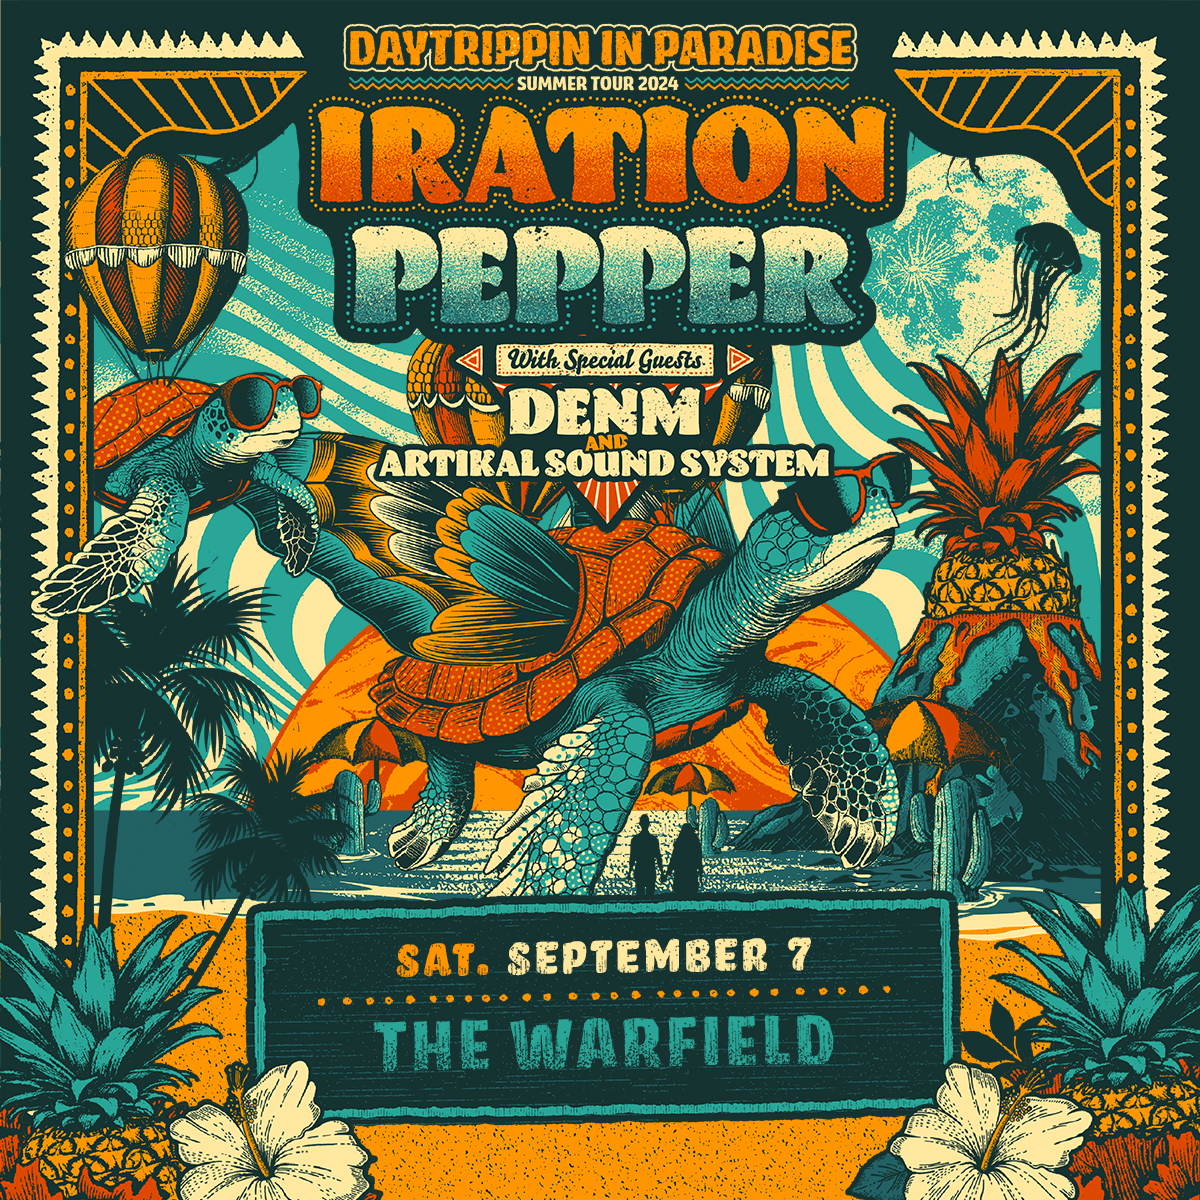 we've decided summer's never ending with @Iration & @PepperLive hitting The Bay on Sept. 7 🌞🍃 presale - wednesday 3.27 on sale - thursday 3.28 🎟 bit.ly/IrationSF